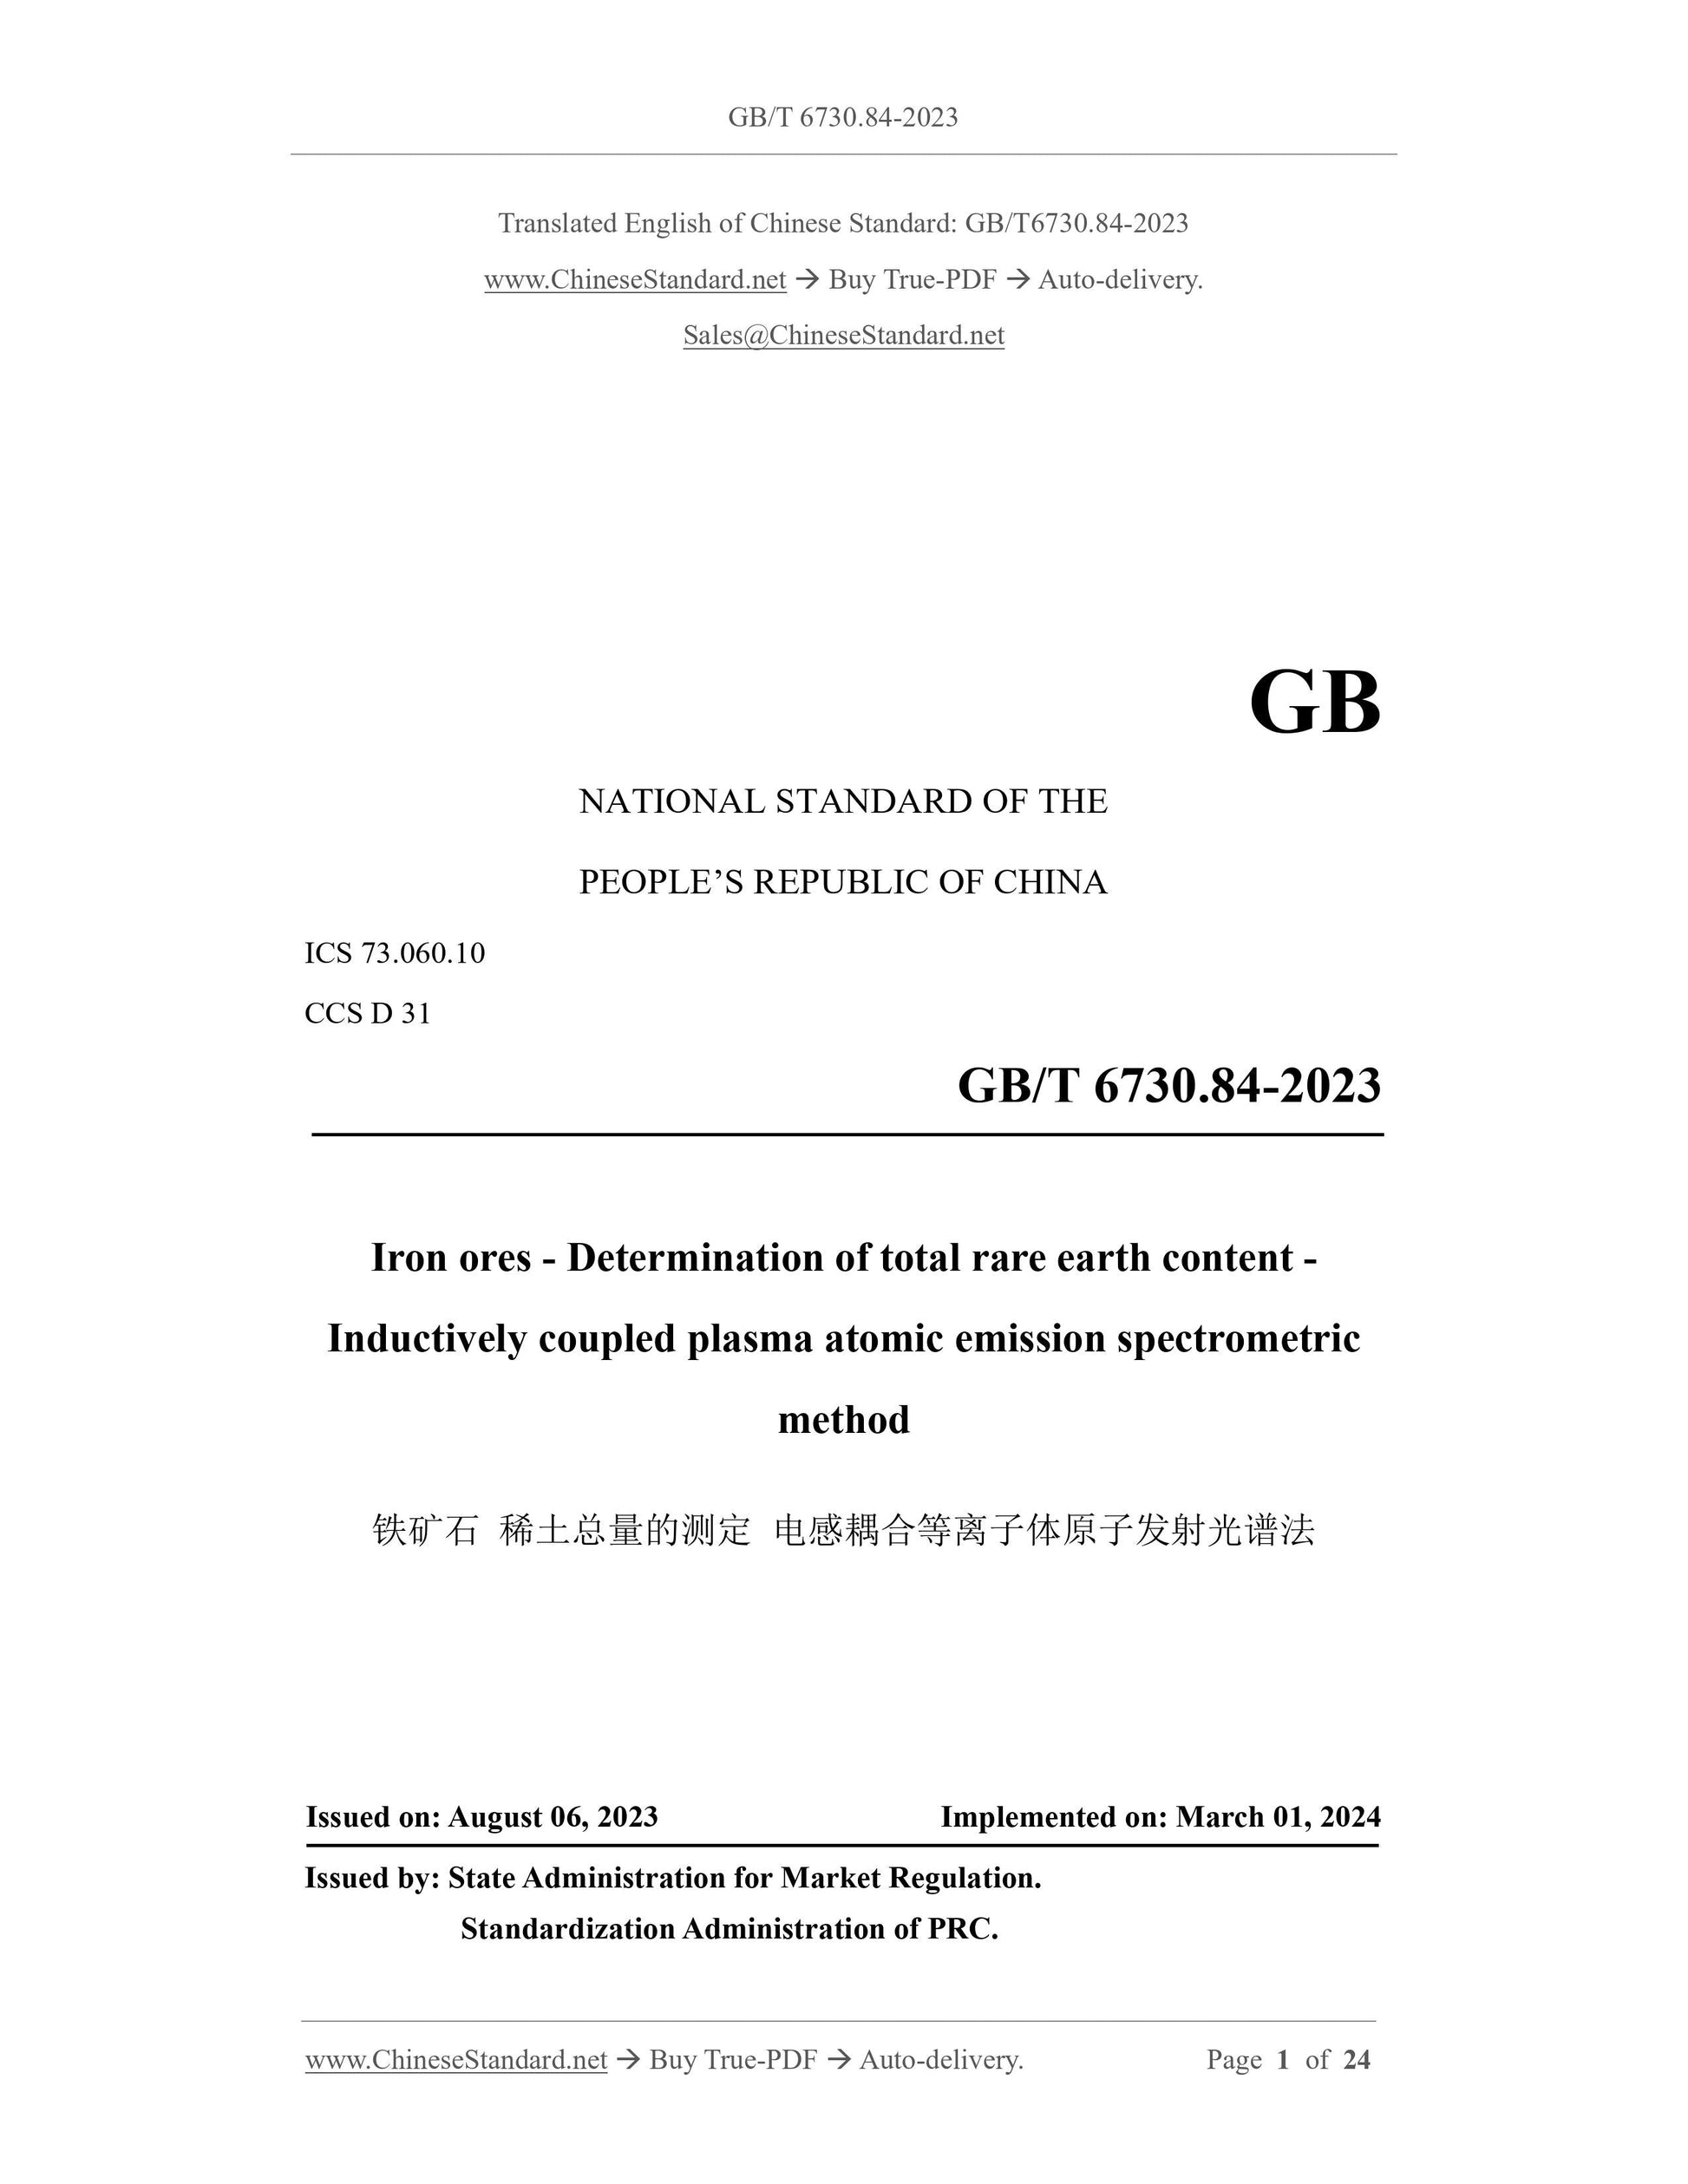 GB/T 6730.84-2023 Page 1